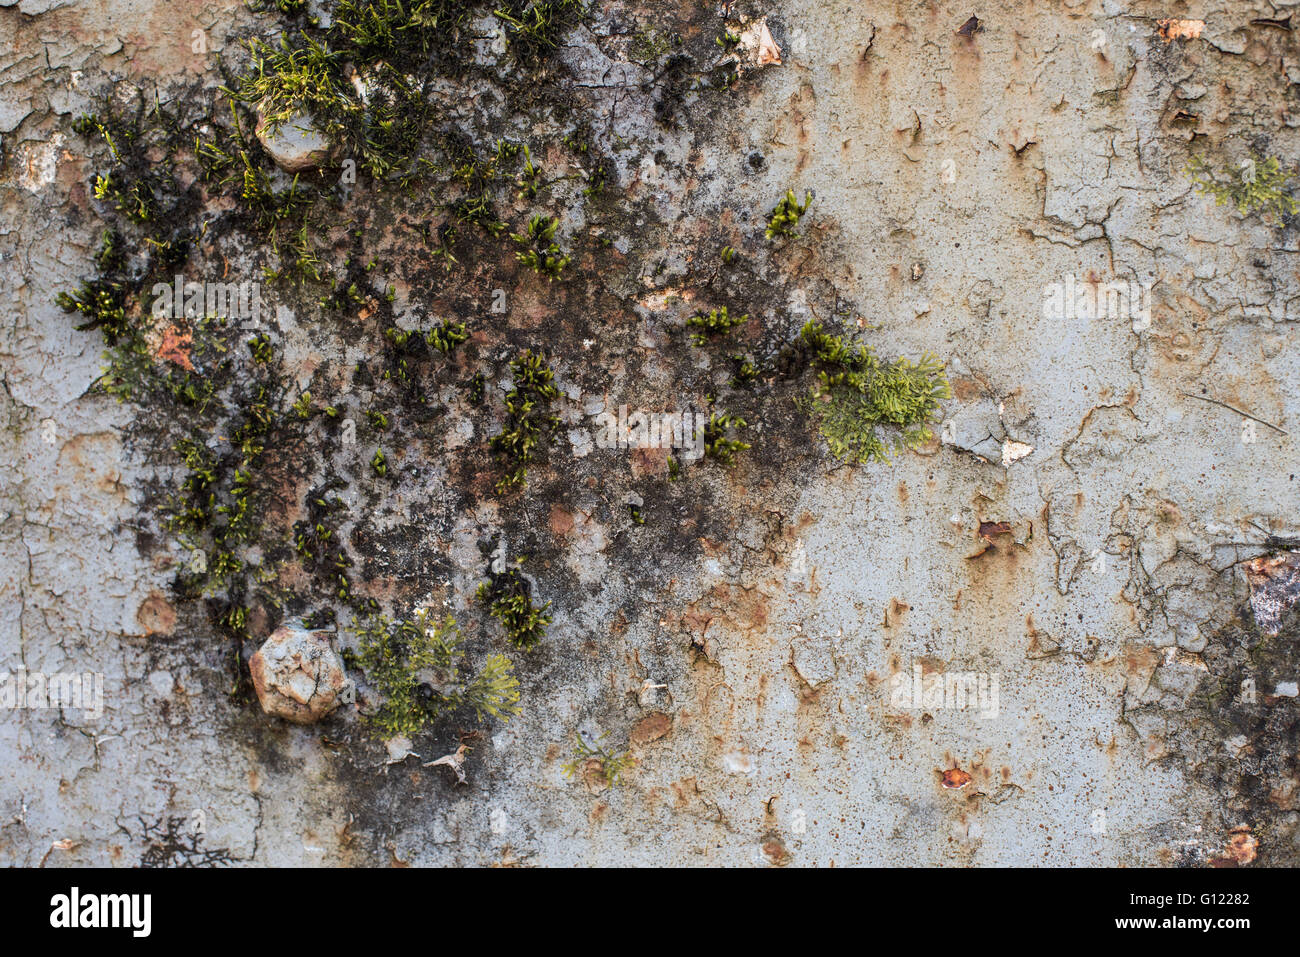 Moss growing on cracked and peeling paint - Clearwell caves Stock Photo